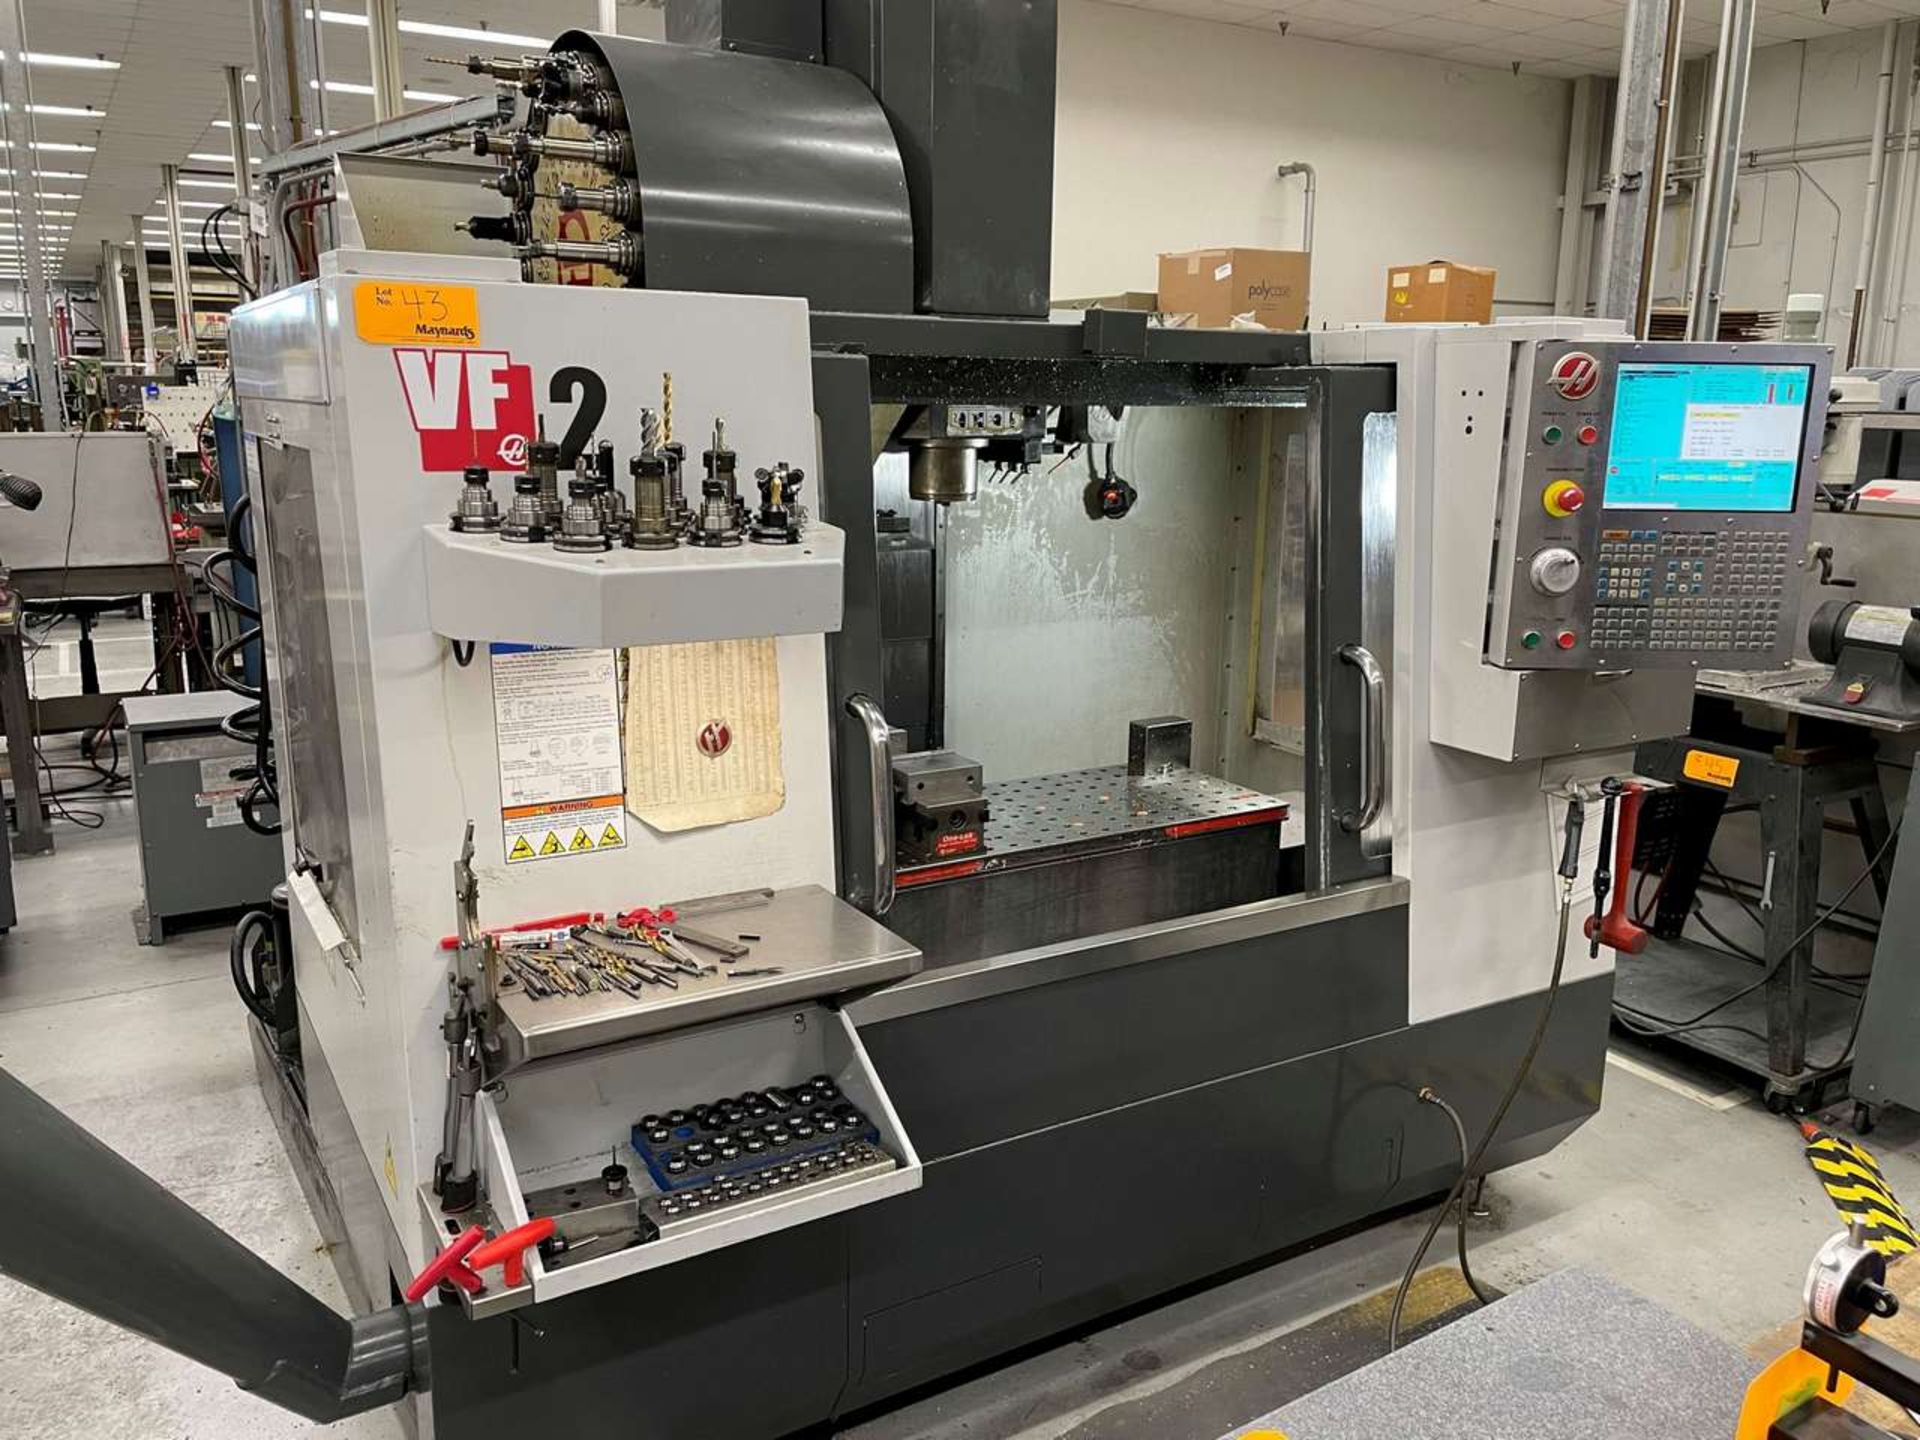 2010 Haas VF-2 CNC Vertical Machining Center - Image 15 of 16